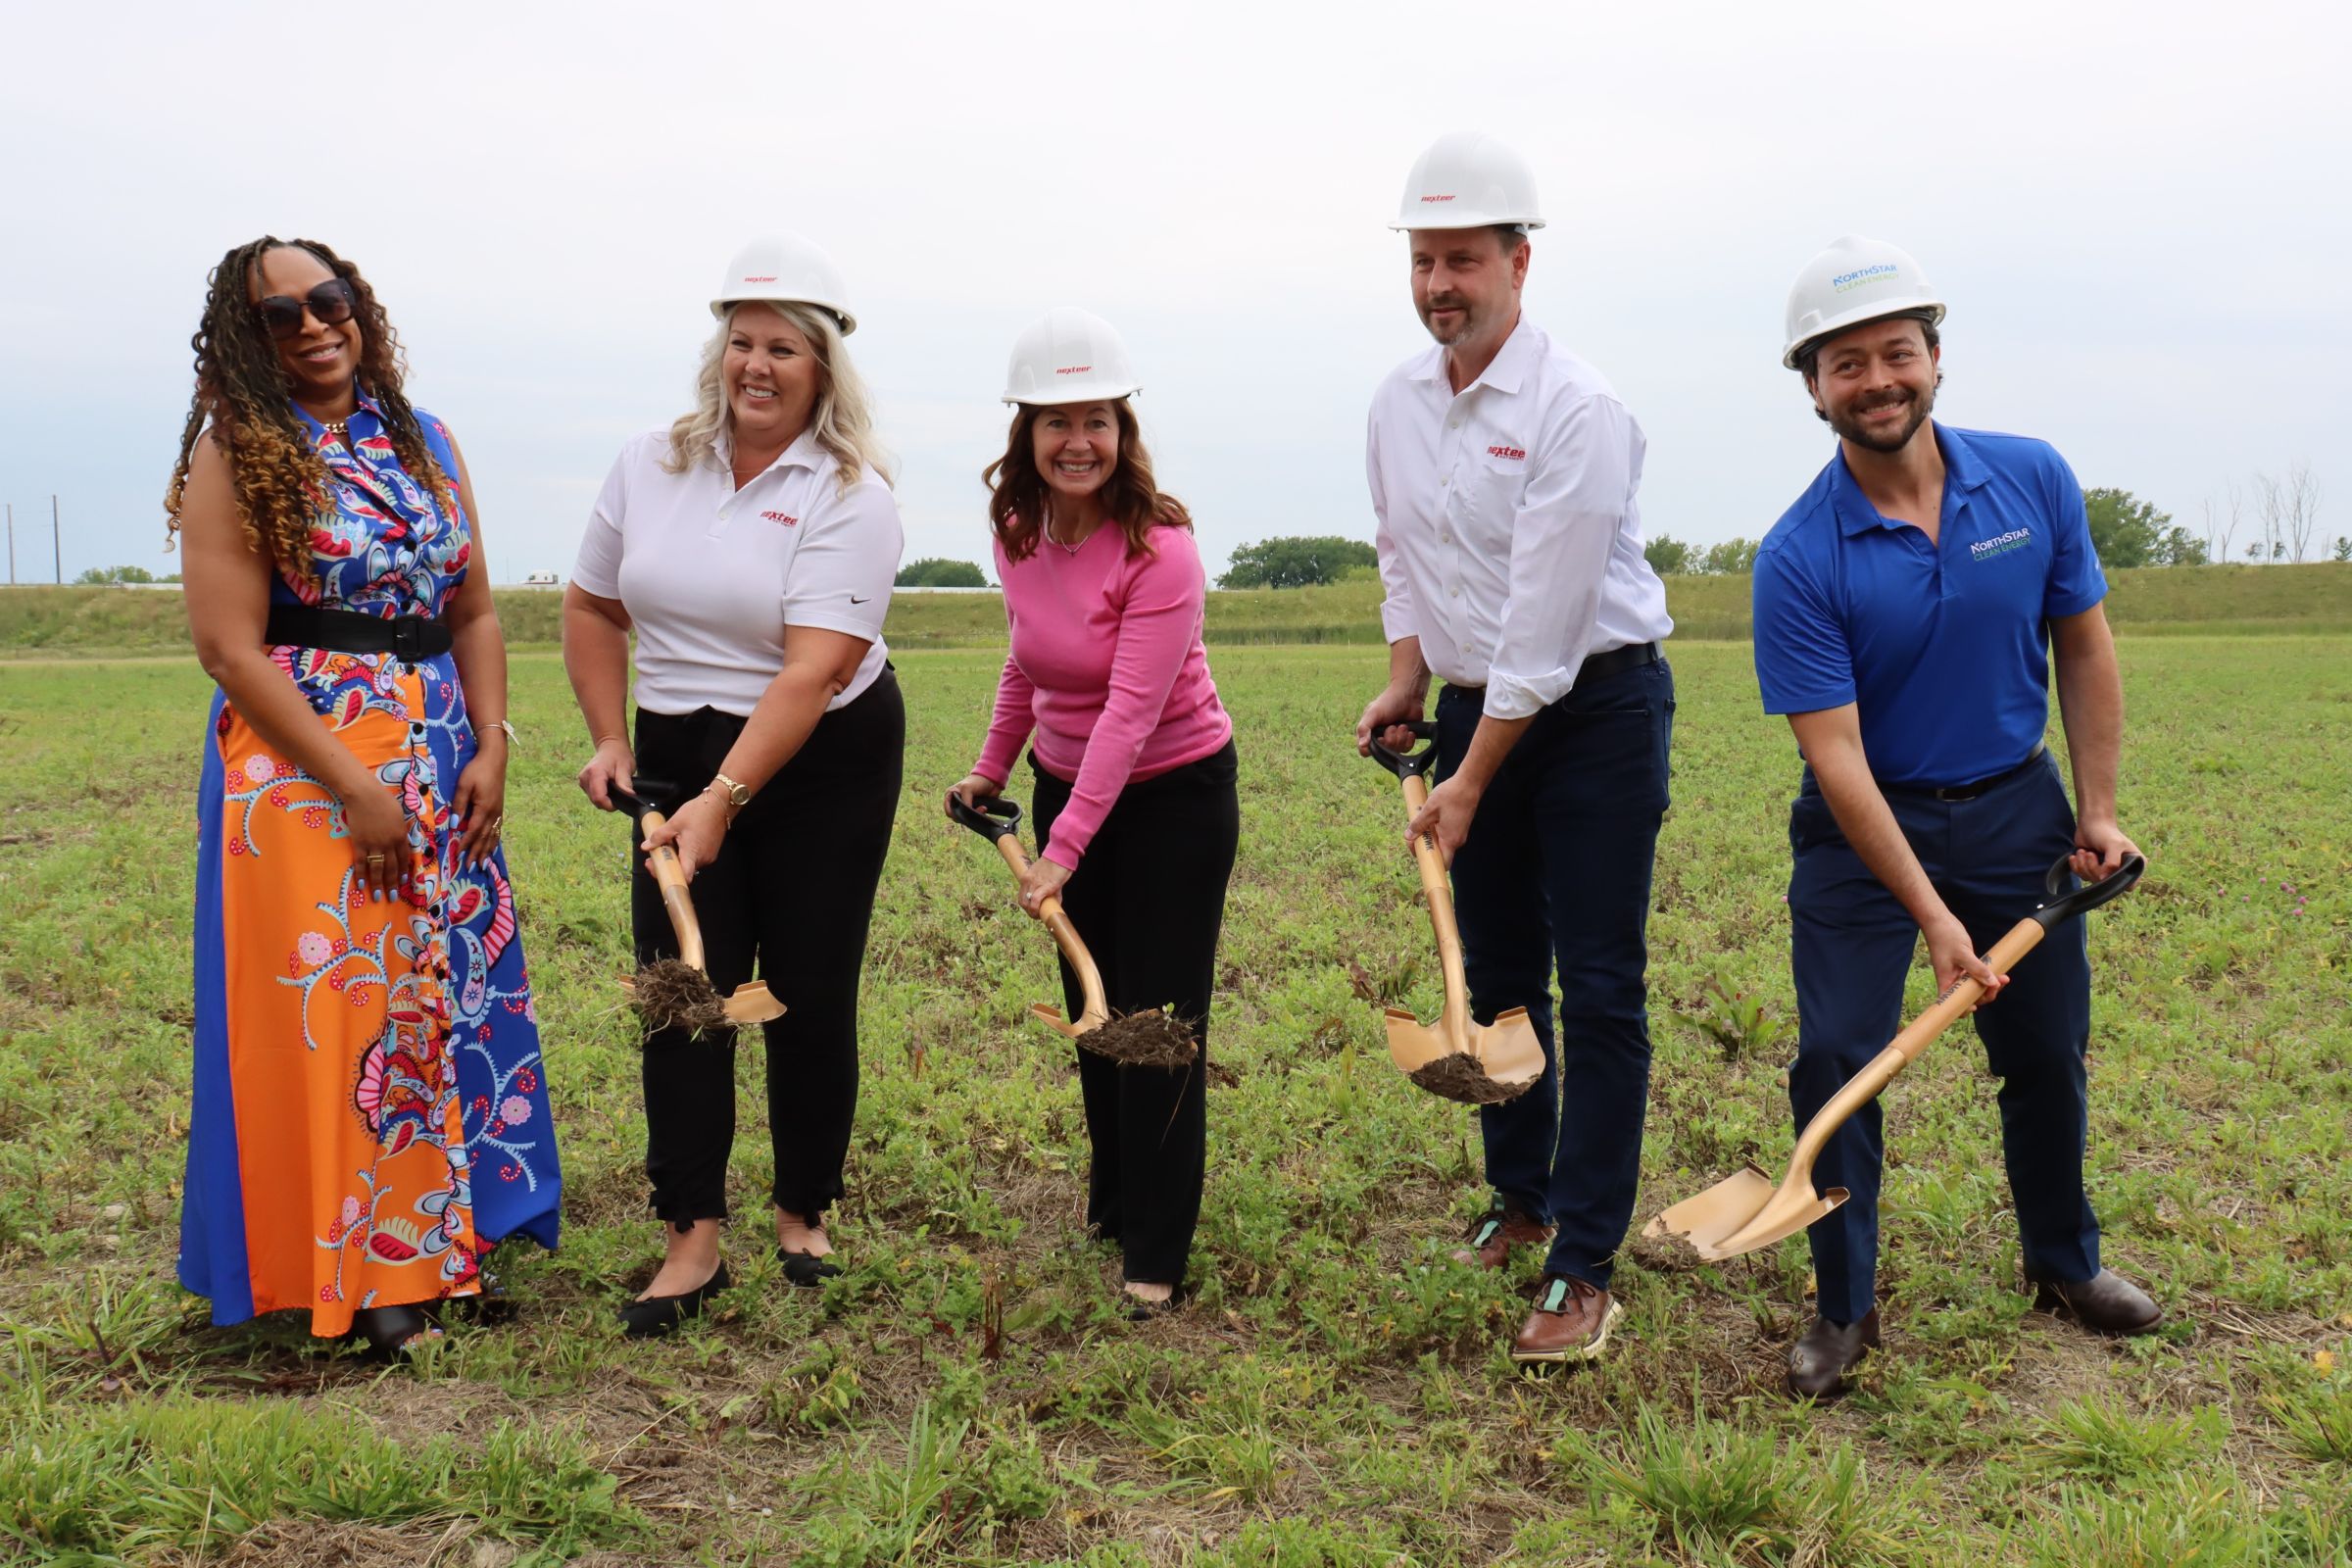 NEXTEER BREAKS GROUND ON SOLAR FIELD AT SAGINAW, MICH. SITE; PARTNERS WITH NORTHSTAR CLEAN ENERGY ON RENEWABLE ENERGY SOLUTION FOR USA OPERATIONS Main Photo